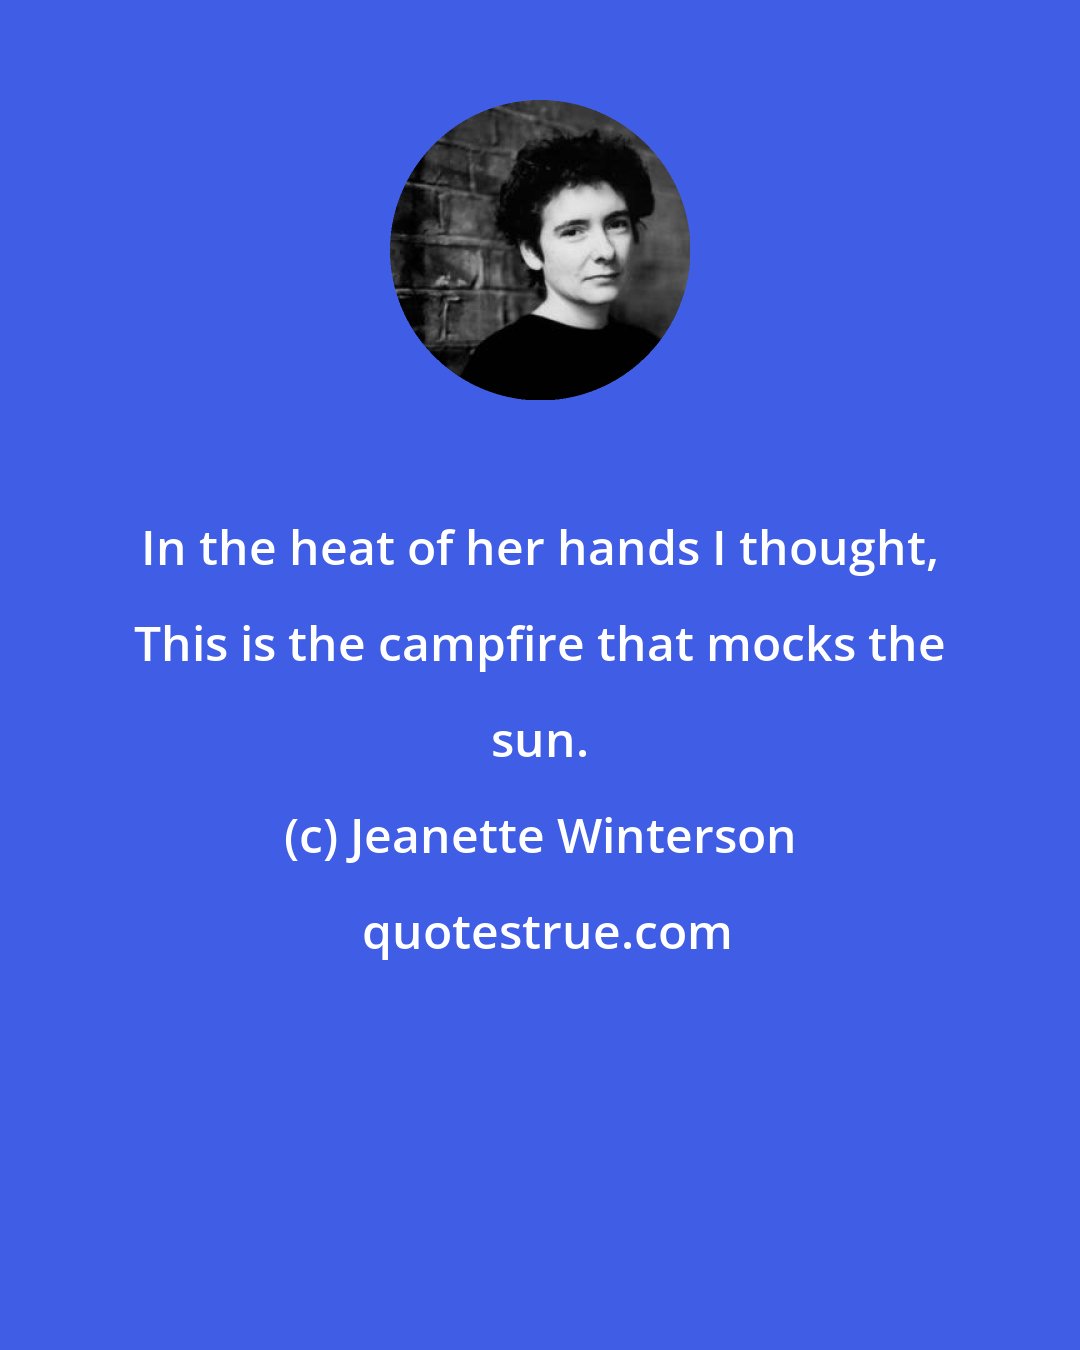 Jeanette Winterson: In the heat of her hands I thought, This is the campfire that mocks the sun.